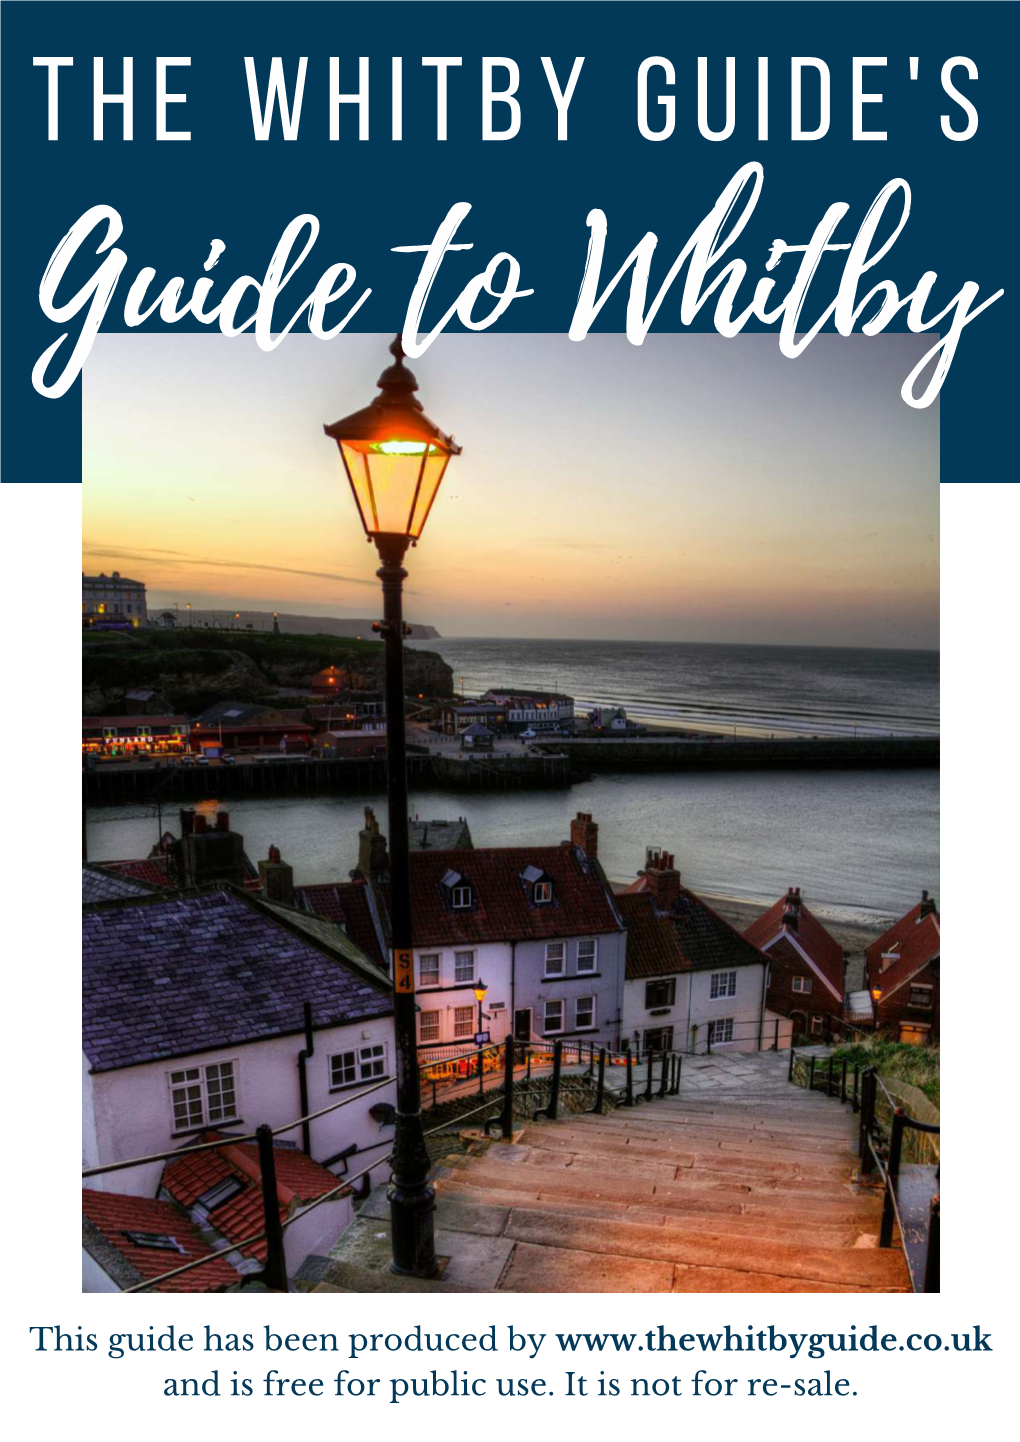 The Whitby Catch Offers Fresh Local Catch Every Day of the Week